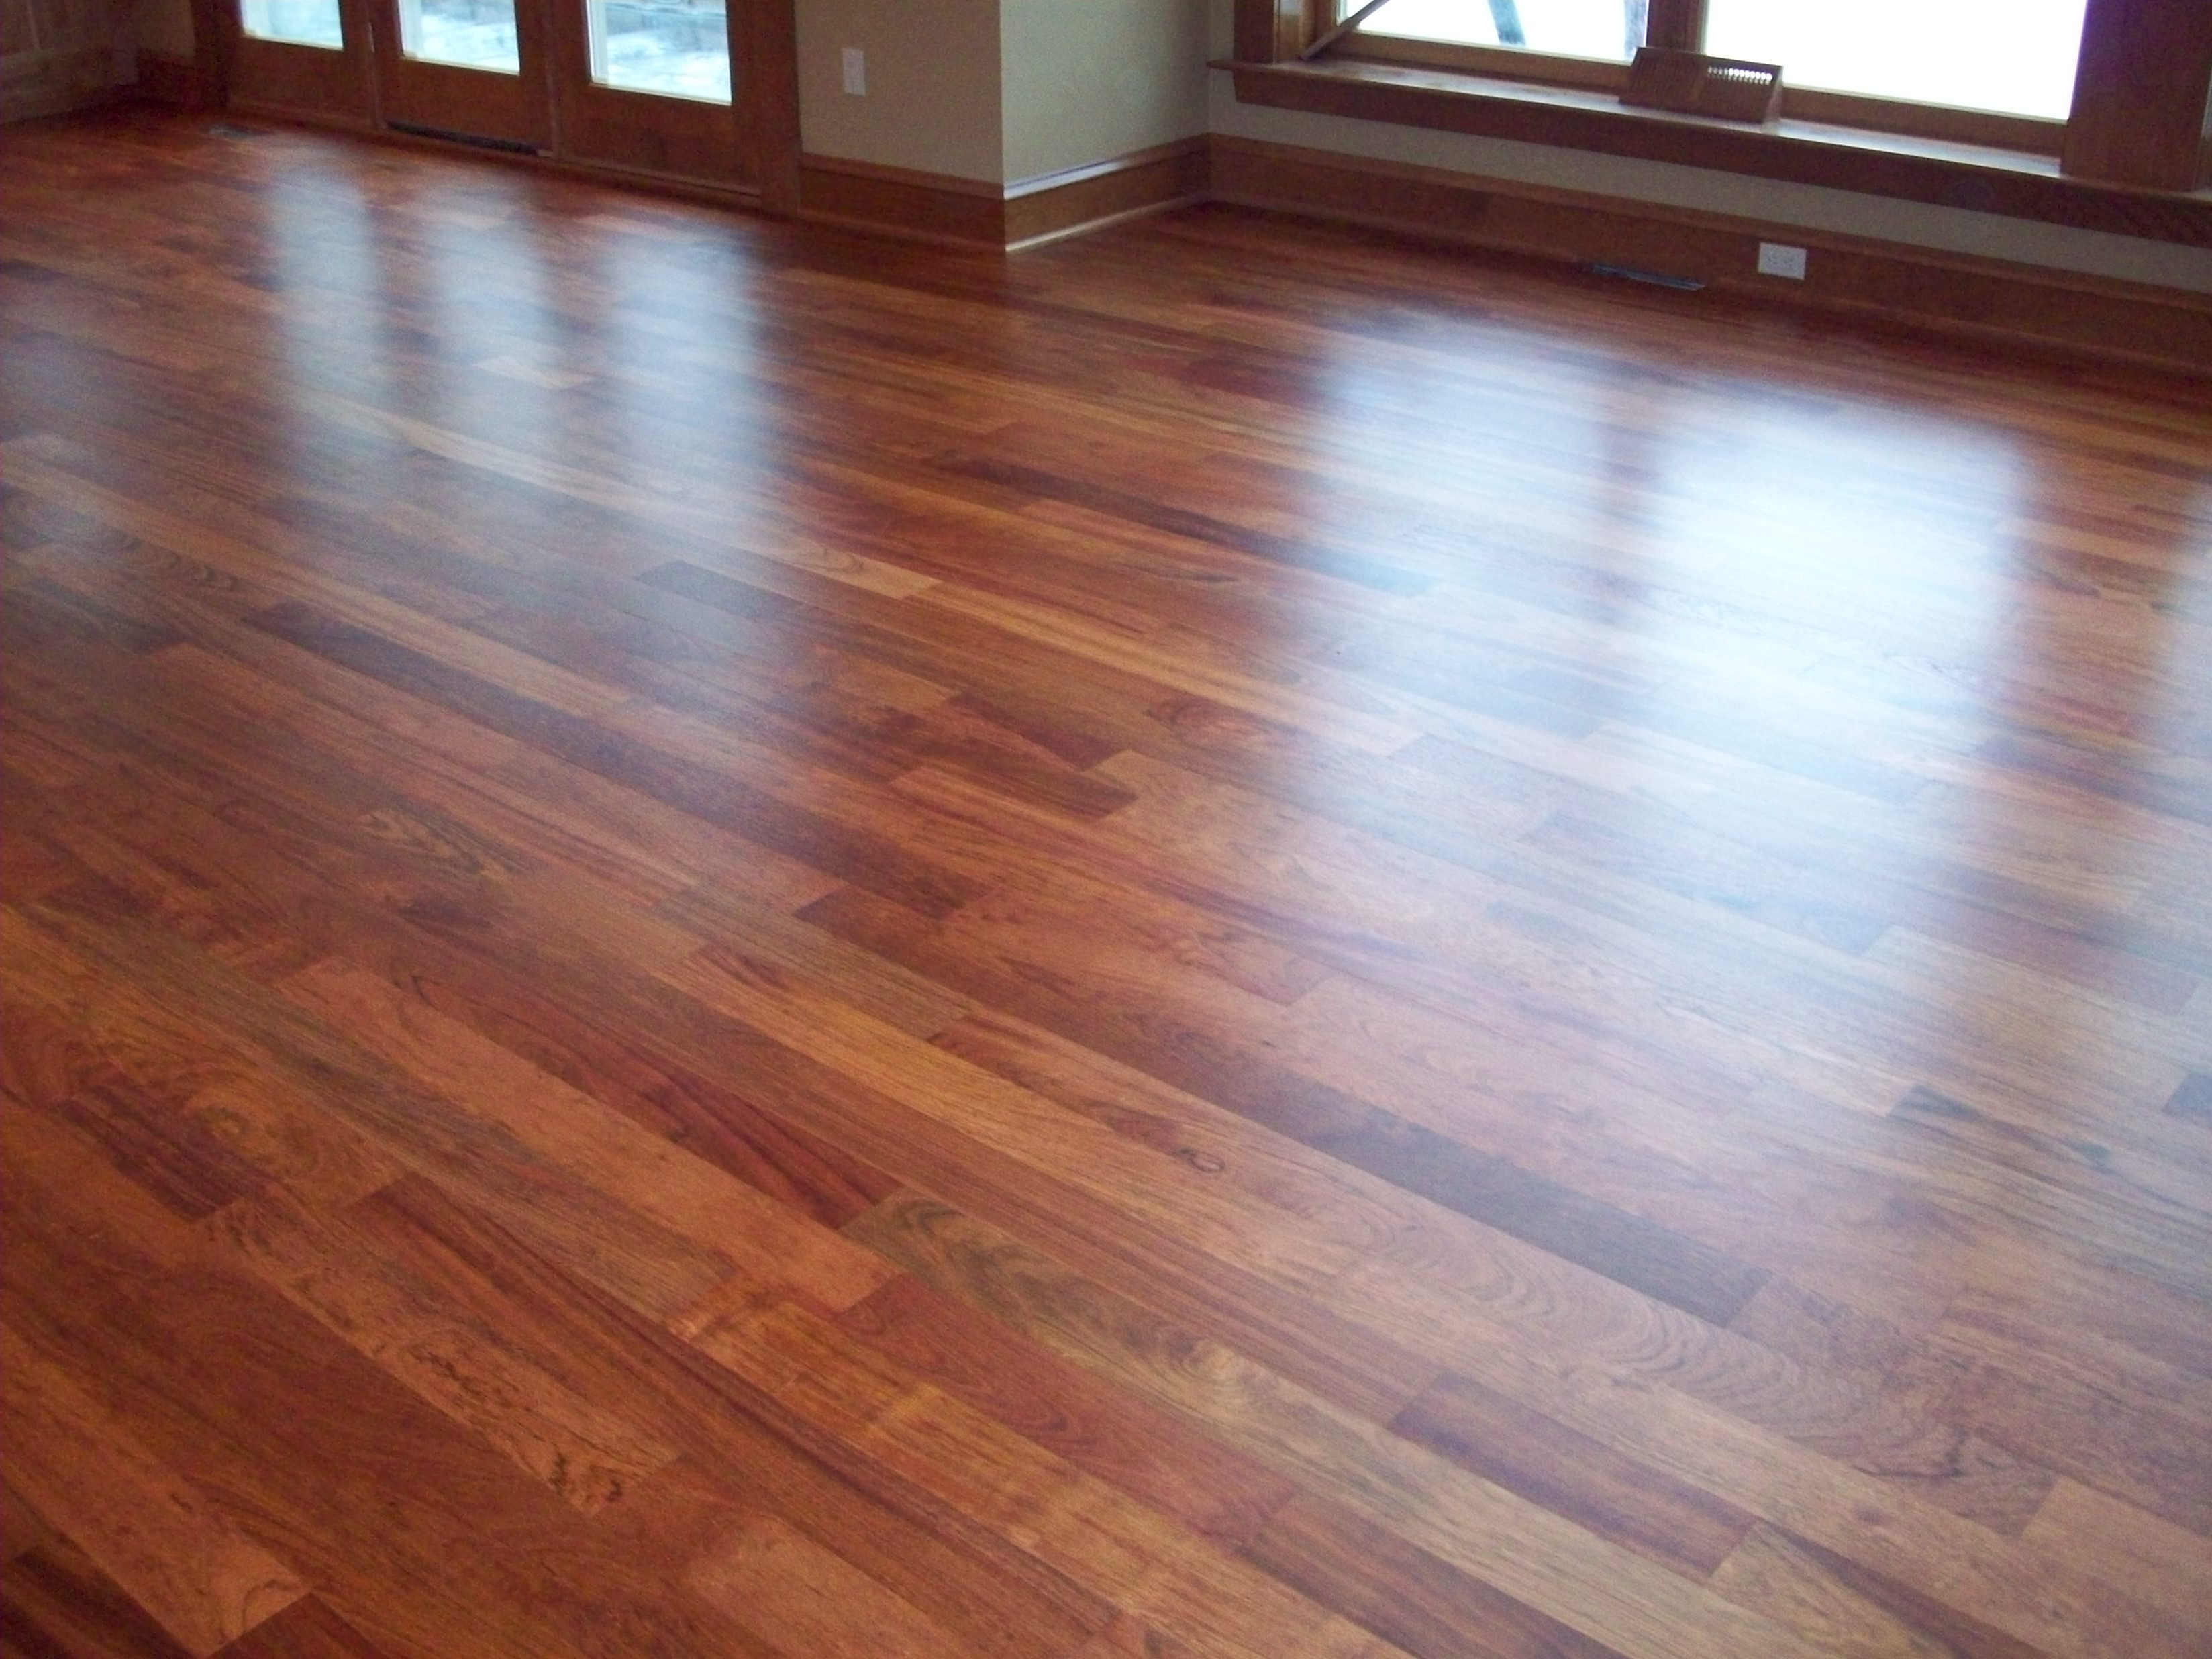 27 Unique Hardwood Flooring Online Shopping 2024 free download hardwood flooring online shopping of forest accents wood floor inspirational engaging discount hardwood regarding forest accents wood floor inspirational engaging discount hardwood flooring 